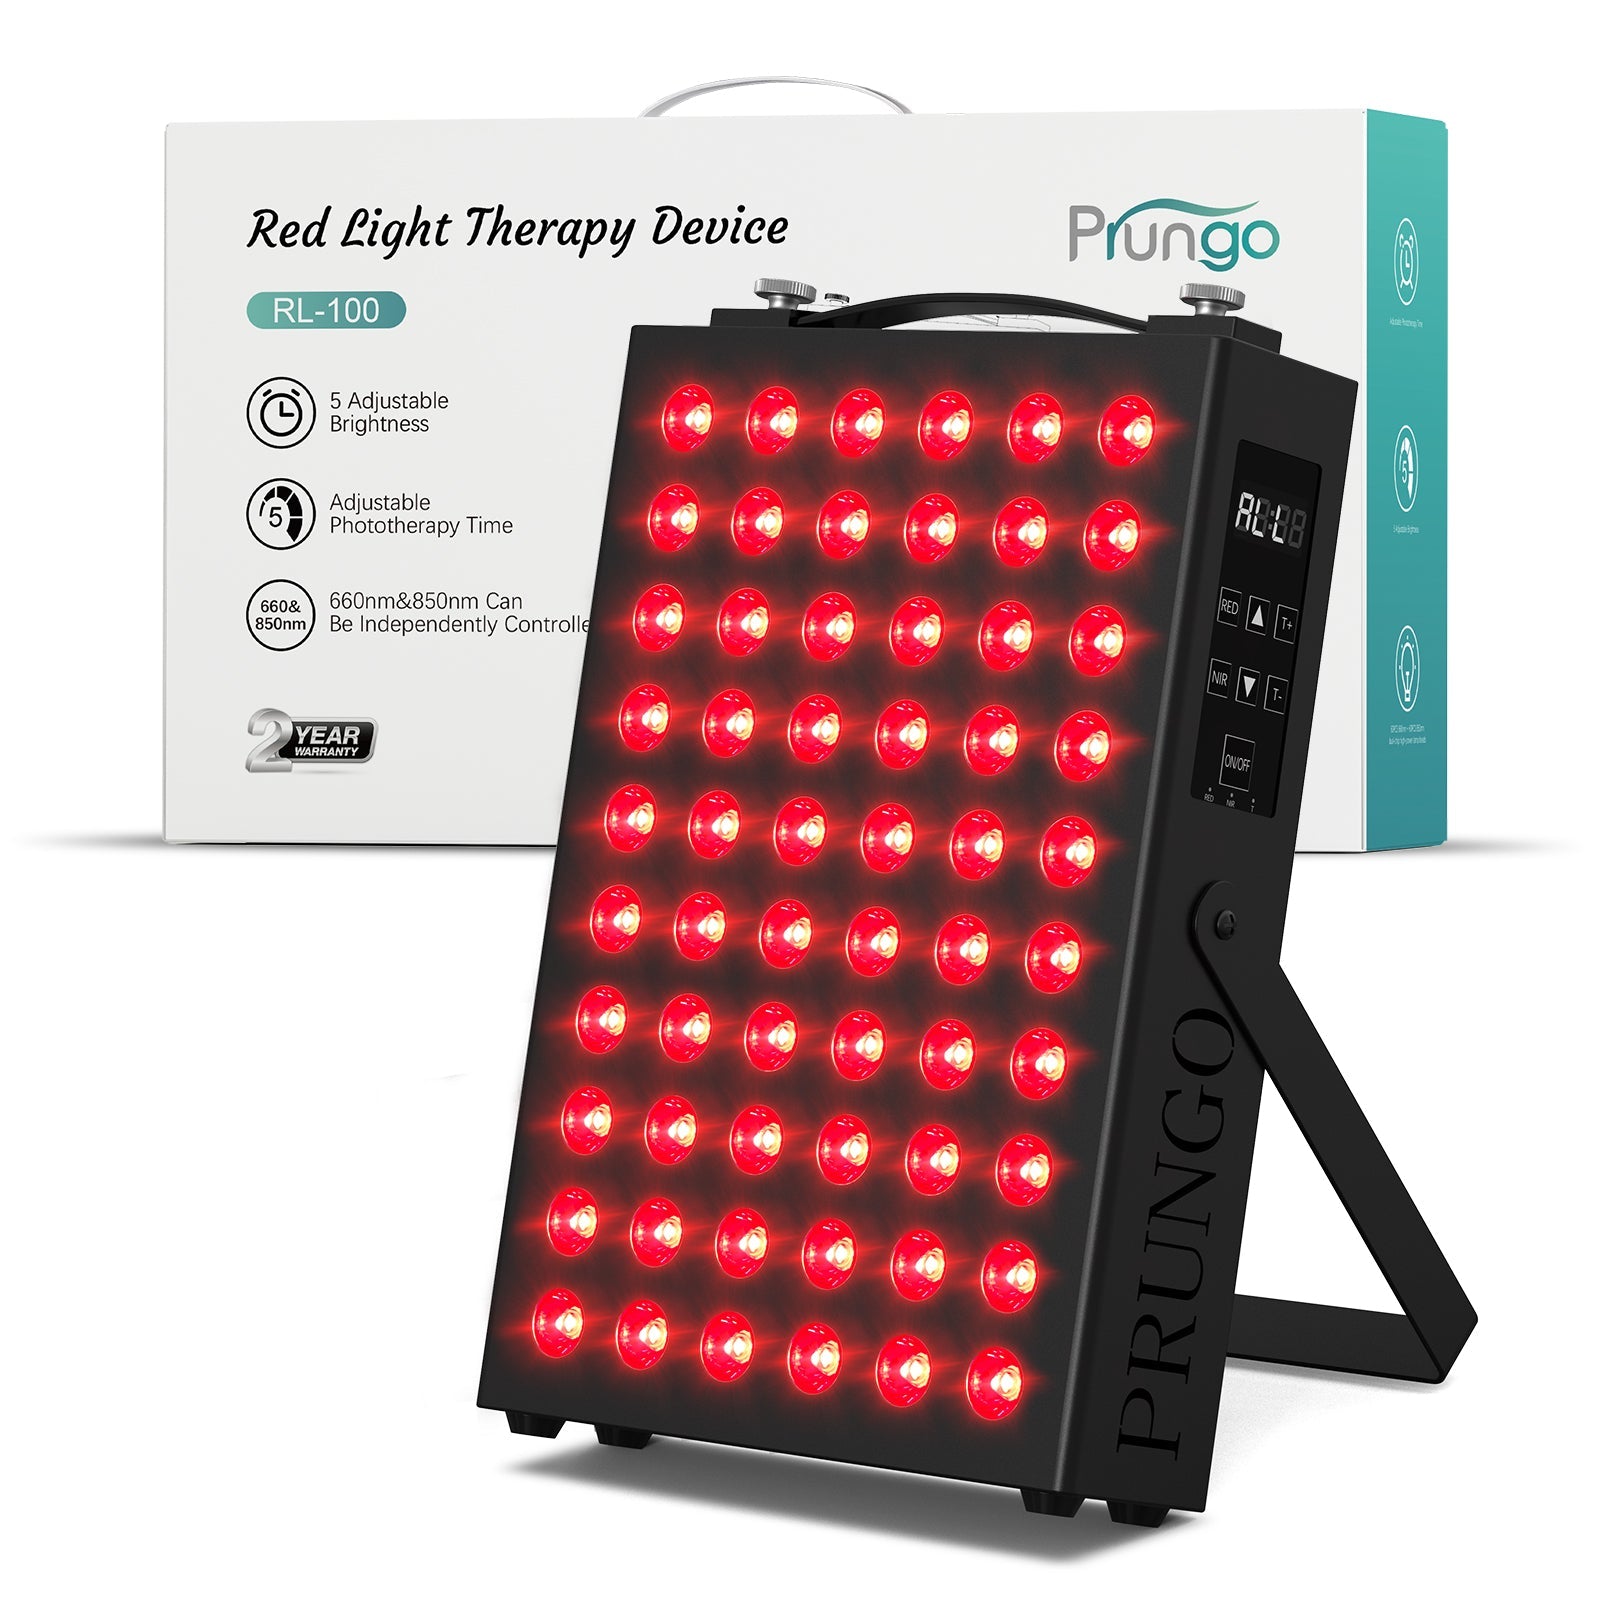 What’s the Best Red Light Therapy Device?